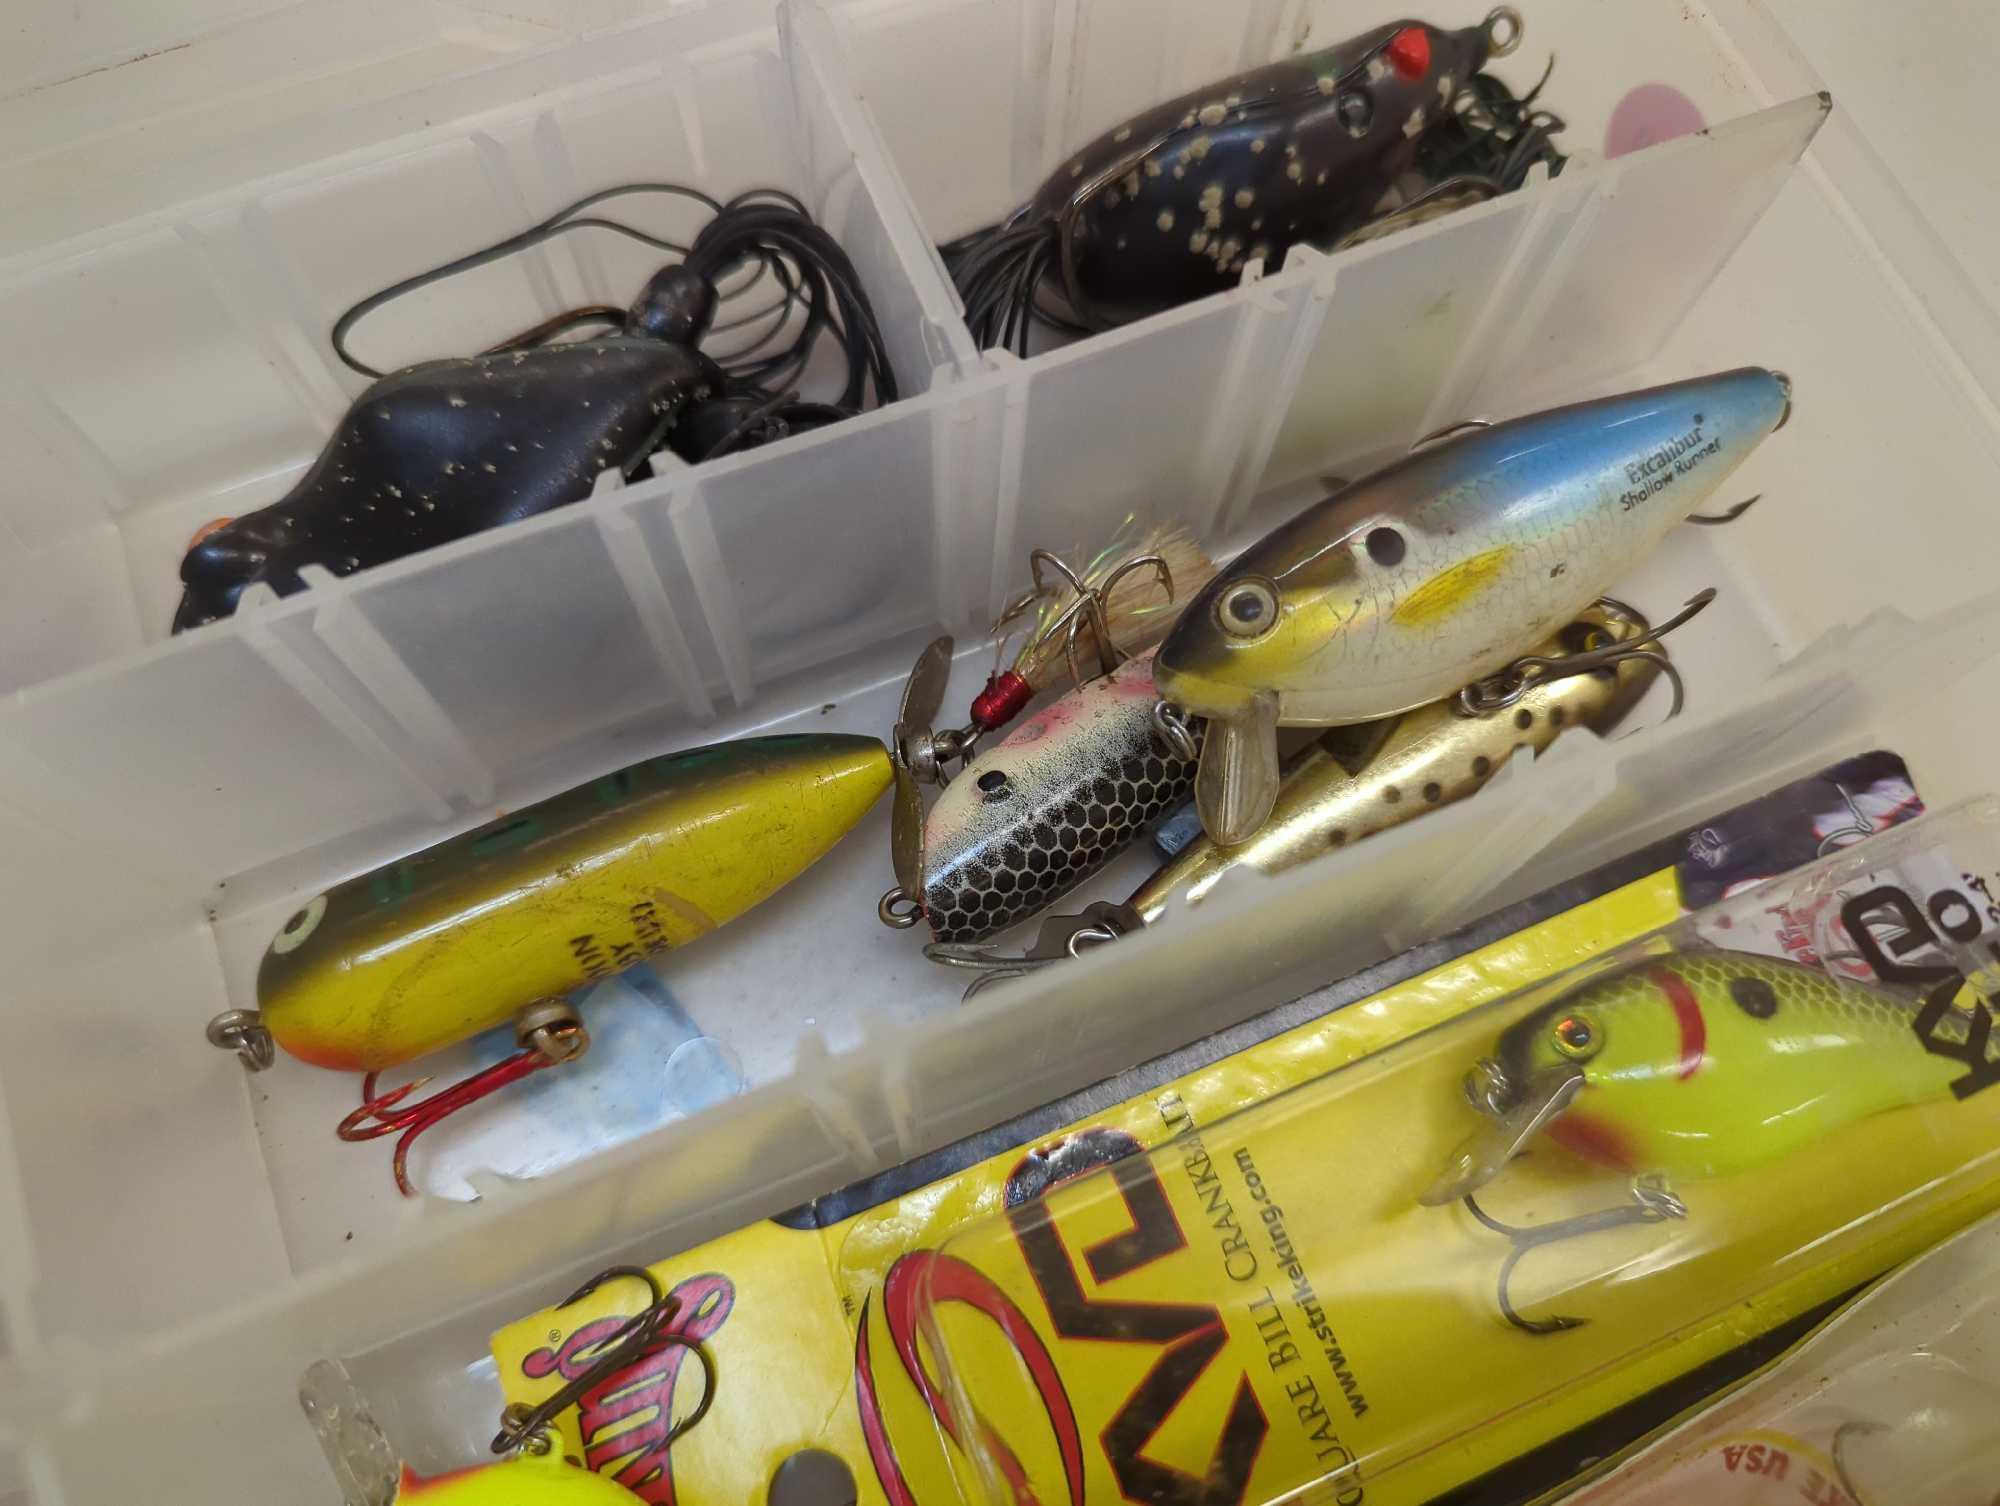 Tackle box and contents including various fishing. Lures. Comes as is shown in photos. Appears to be